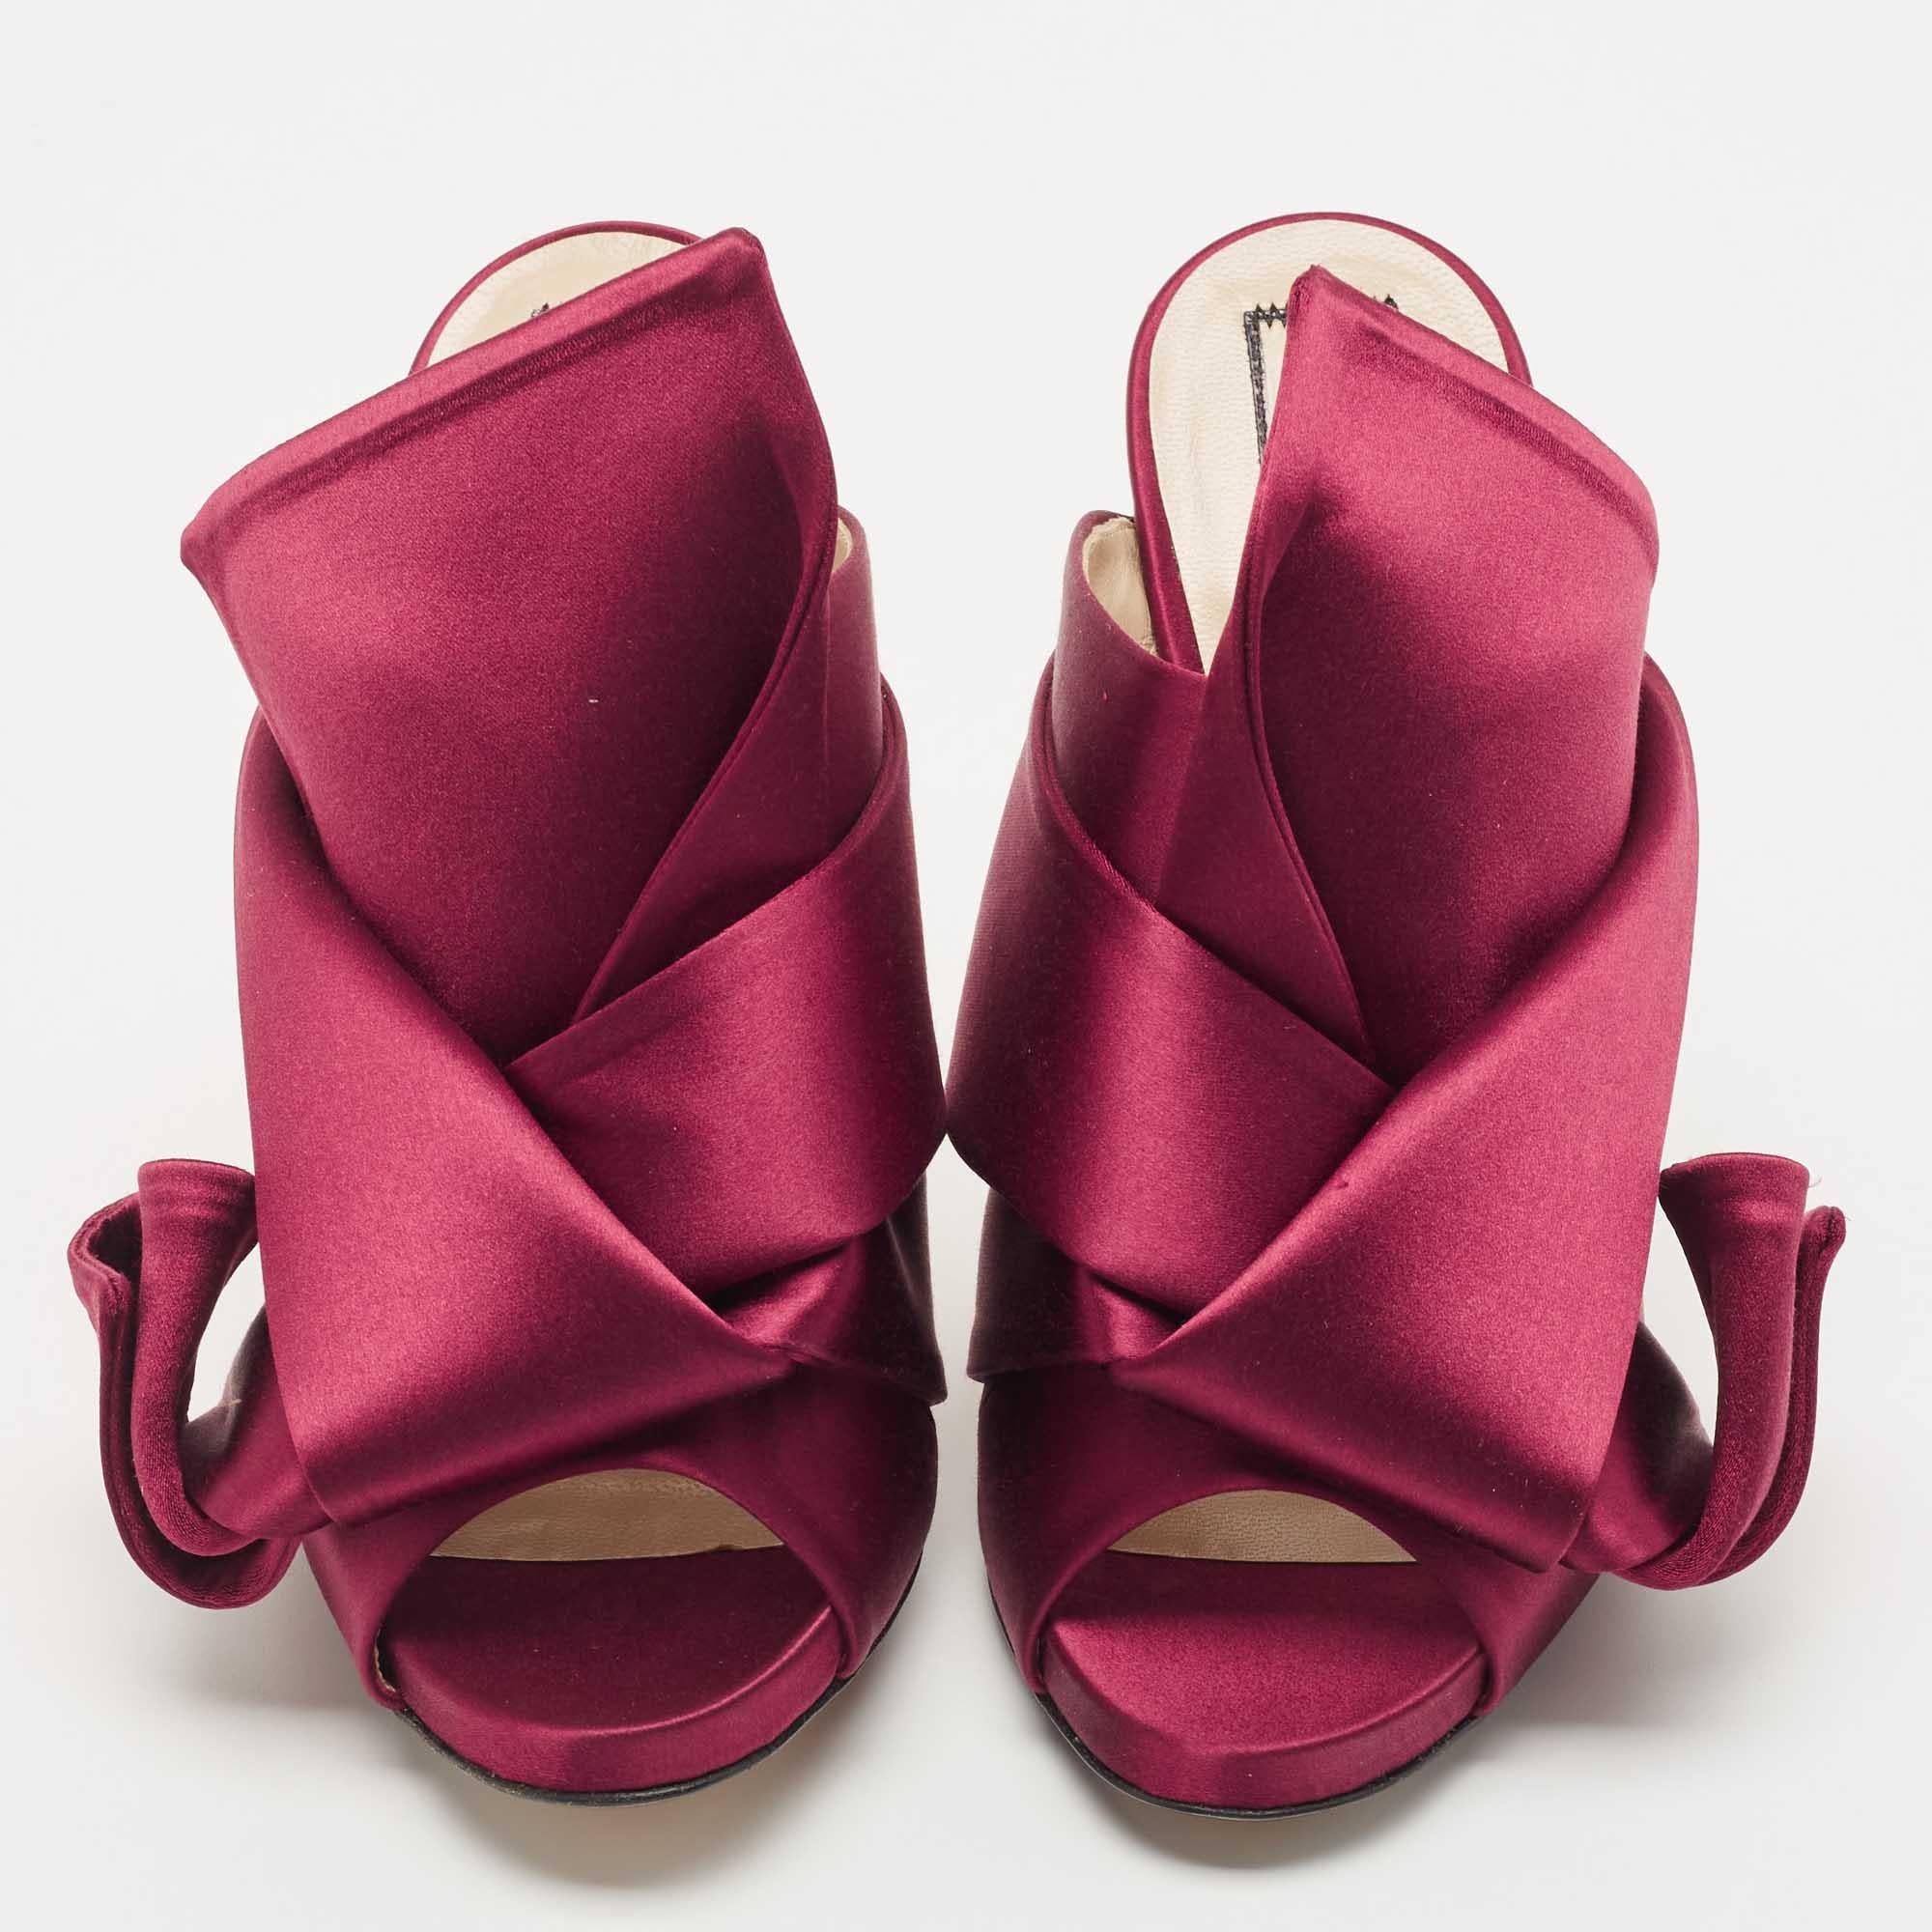 These conversation-starter Ronny sandals from N°21 are worth the buy. Crafted from burgundy satin, this pair of slip-on slides is ornate with a draped pleat detail on the vamp. The insoles are lined with leather and complete with stiletto